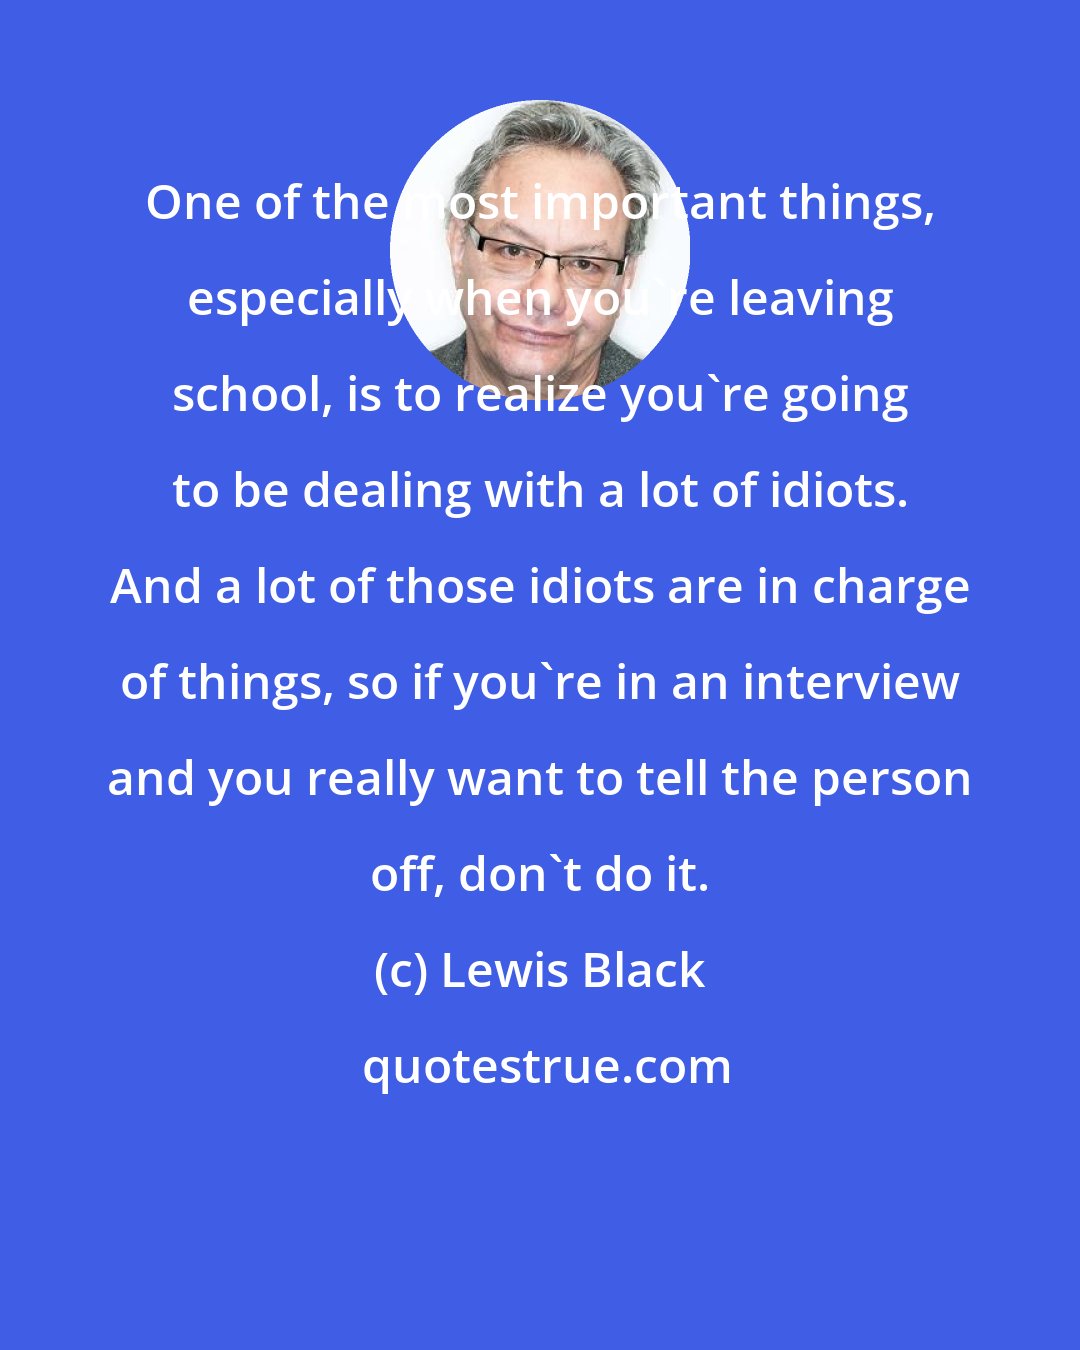 Lewis Black: One of the most important things, especially when you're leaving school, is to realize you're going to be dealing with a lot of idiots. And a lot of those idiots are in charge of things, so if you're in an interview and you really want to tell the person off, don't do it.